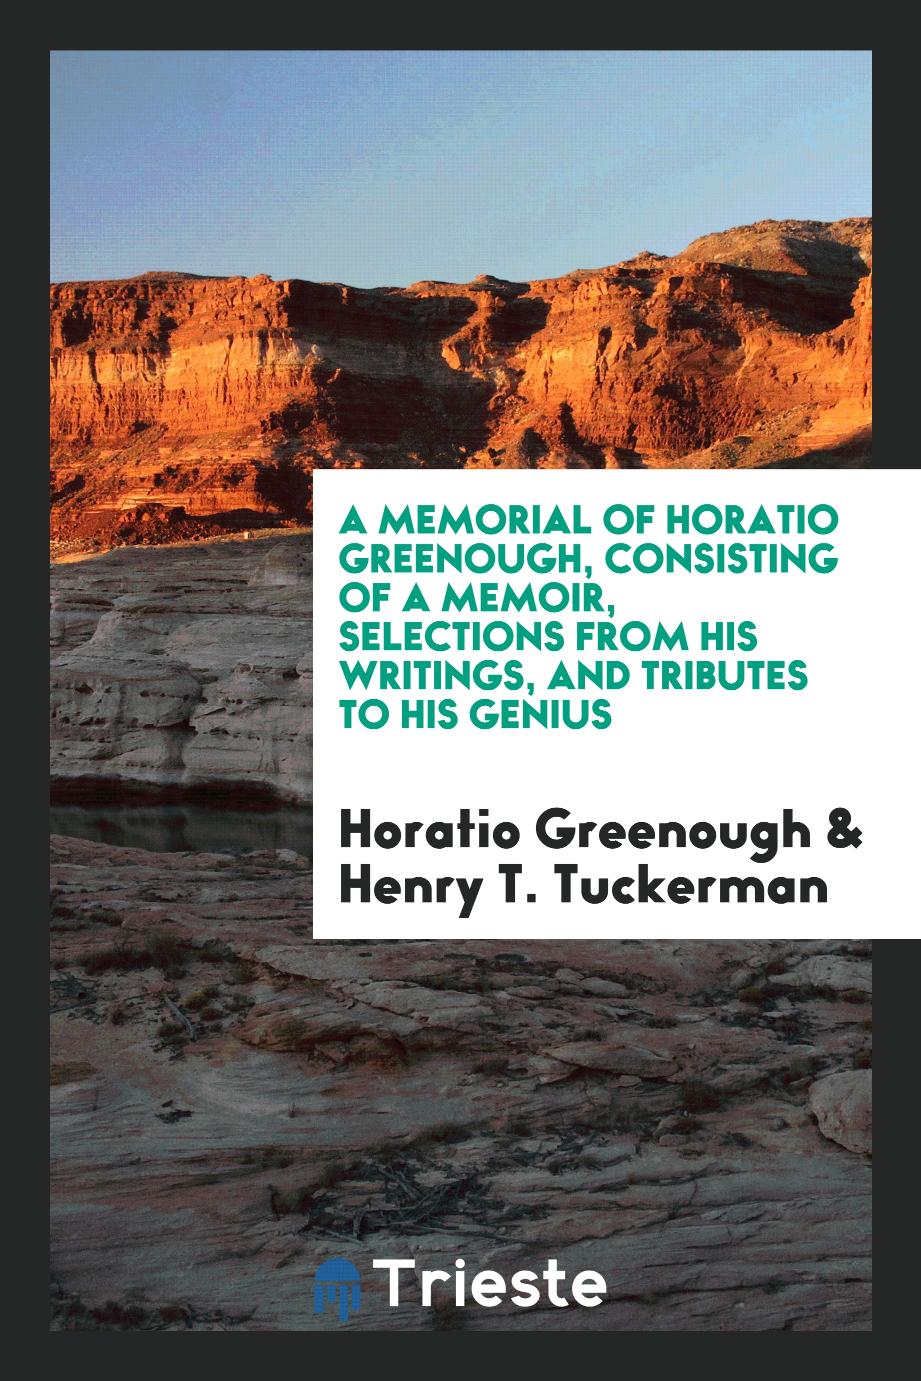 A Memorial of Horatio Greenough, Consisting of a Memoir, Selections from His Writings, and Tributes to His Genius